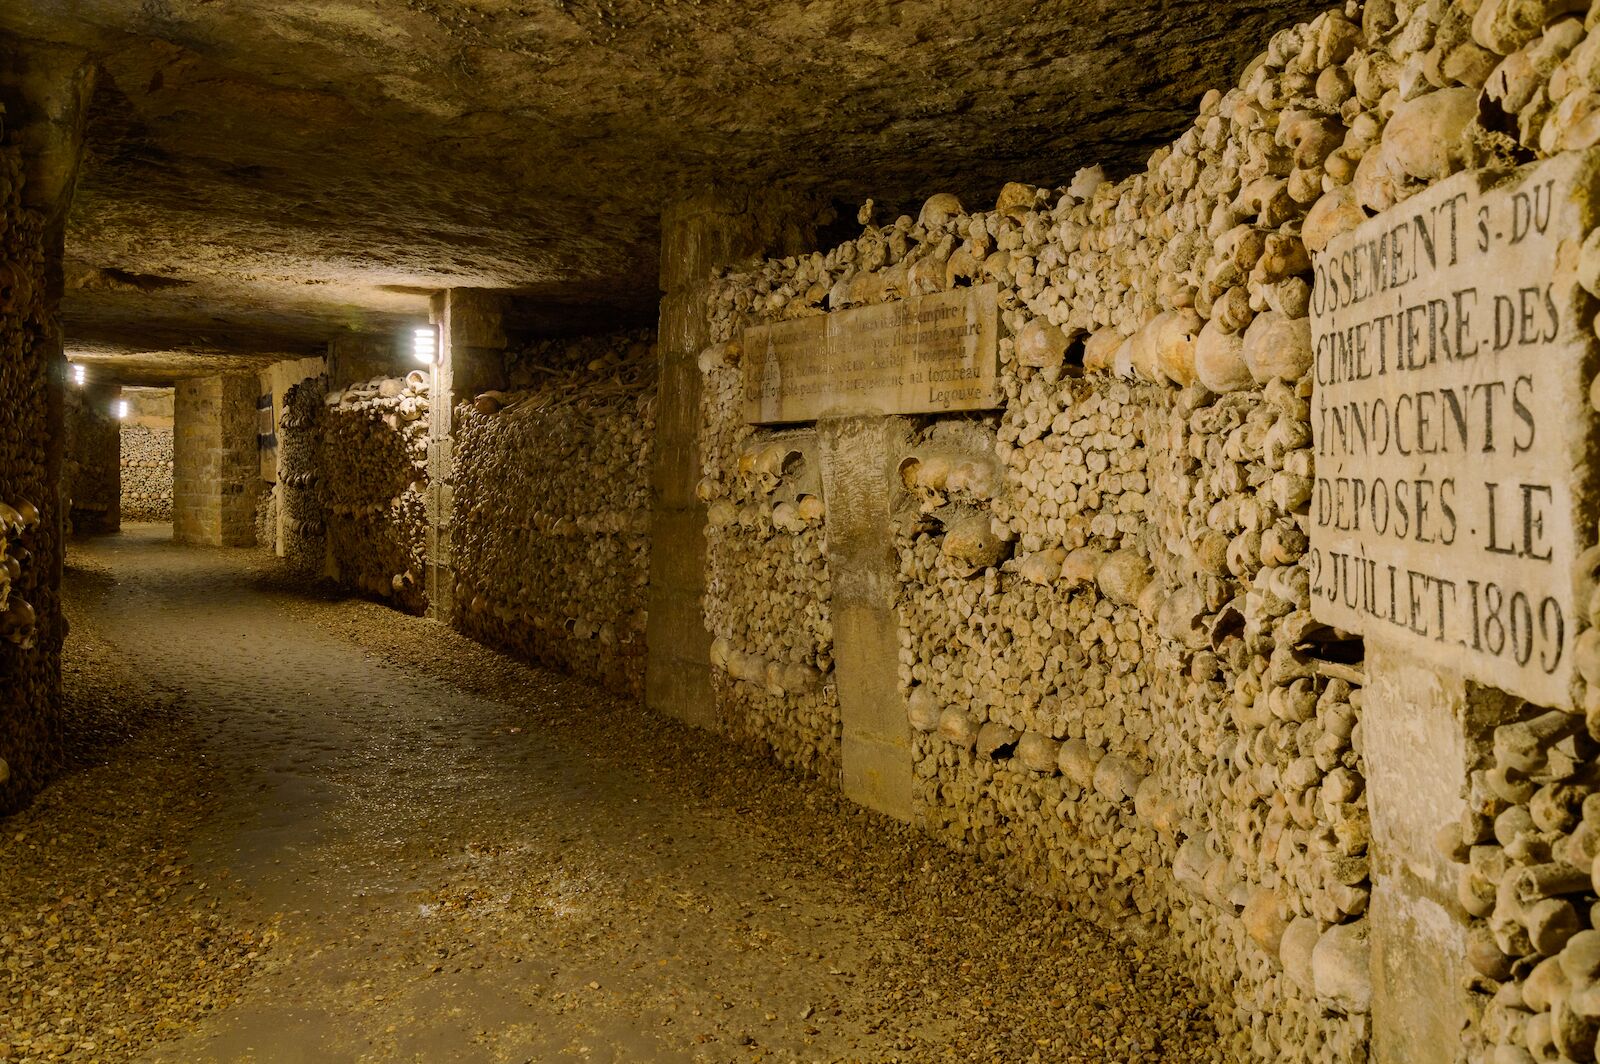 View inside the catacombs of Paris, France